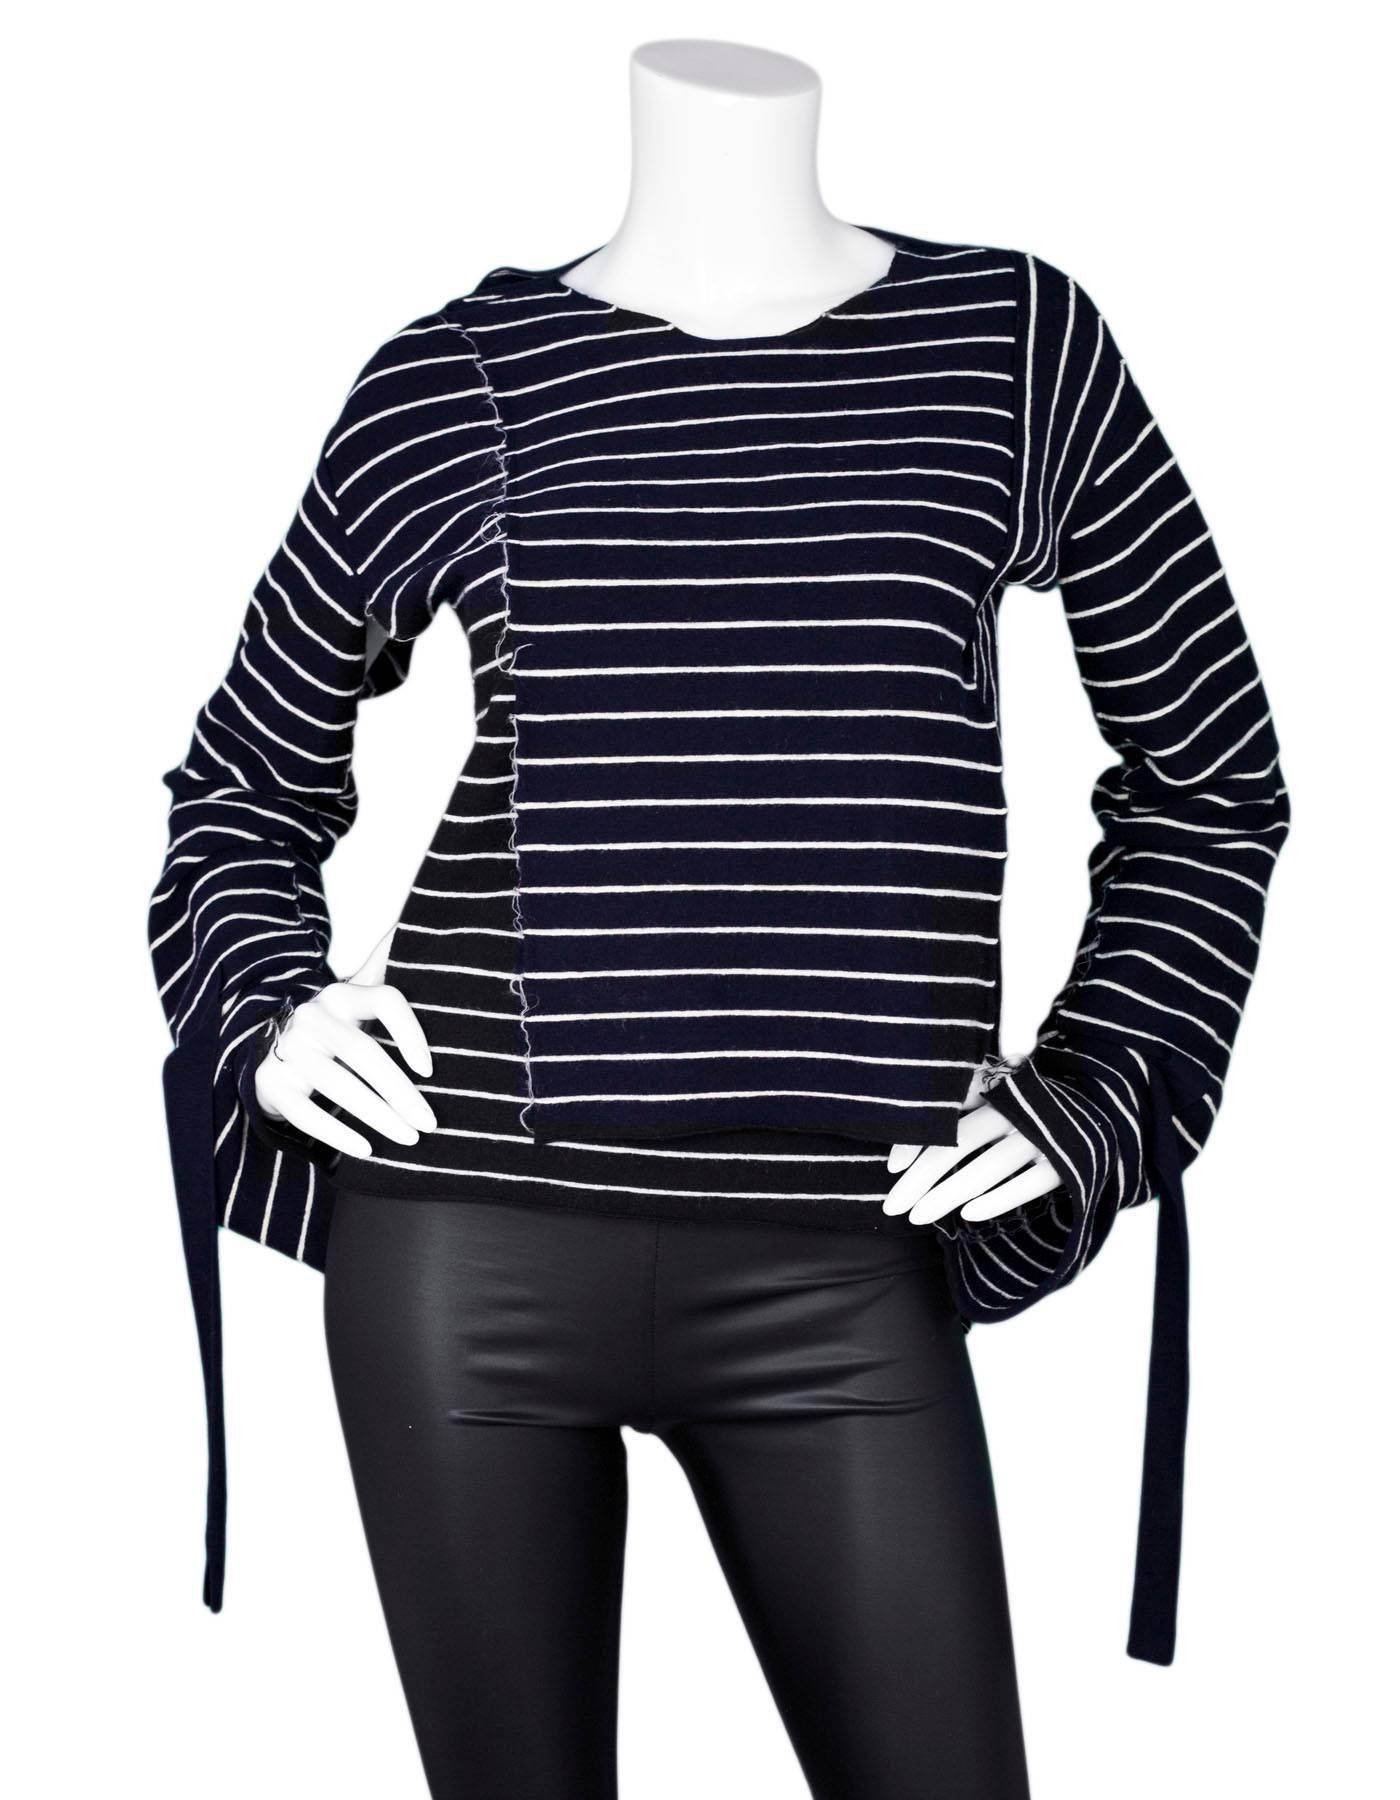 Distressed Celine Navy & White Stripe Top Sz M

Made In: Italy
Color: Navy, white
Composition: 83% Laine, 11% Mohair, 6% Polyamide
Closure/Opening: Pull over
Overall Condition: Excellent pre-owned condition.  Please note this sweater is